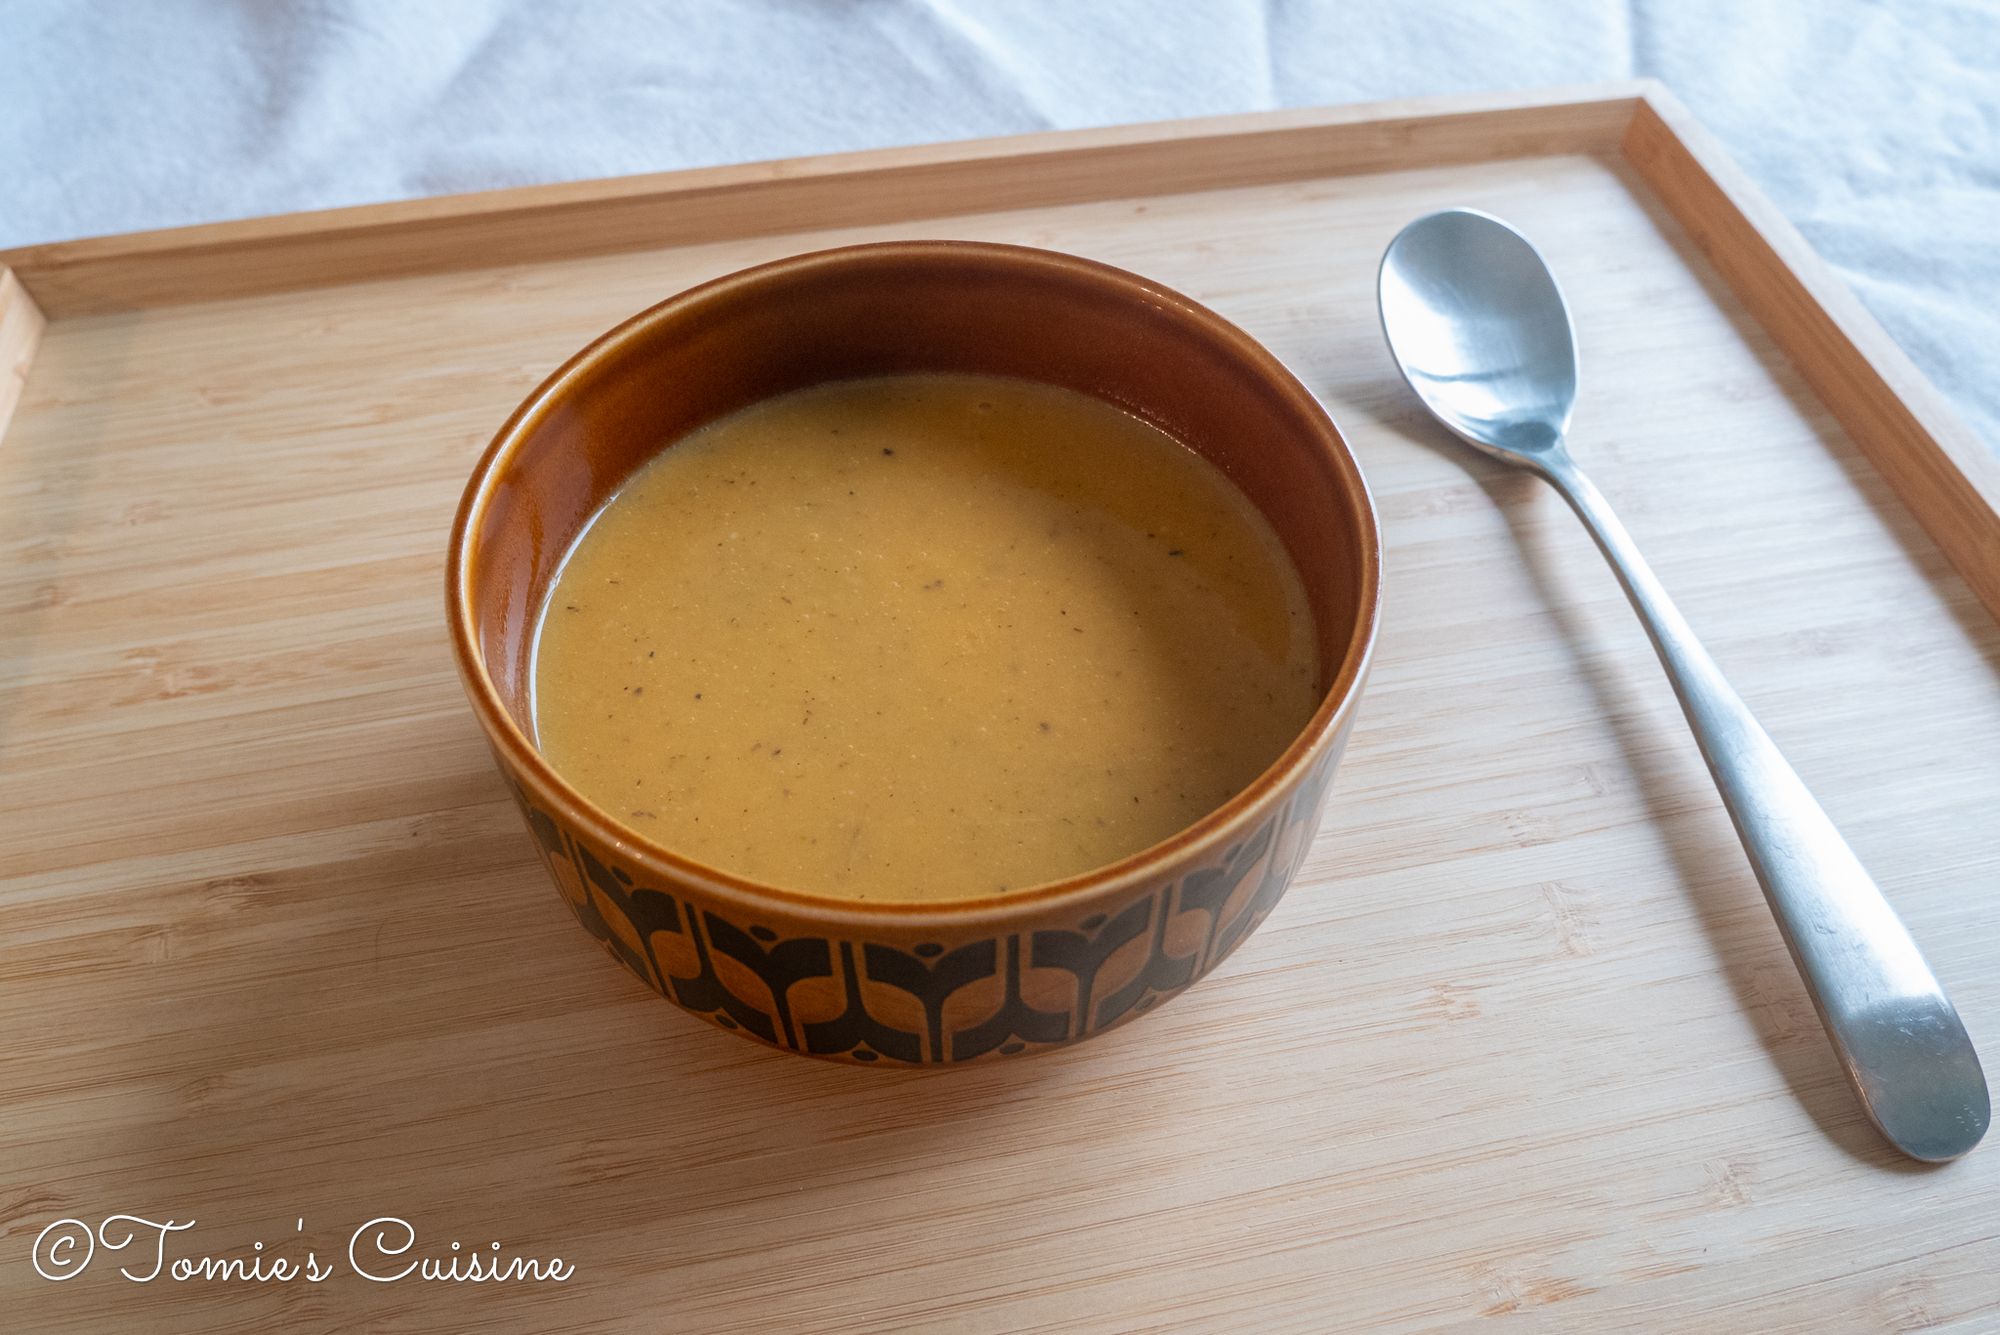 Homemade miso: introduction